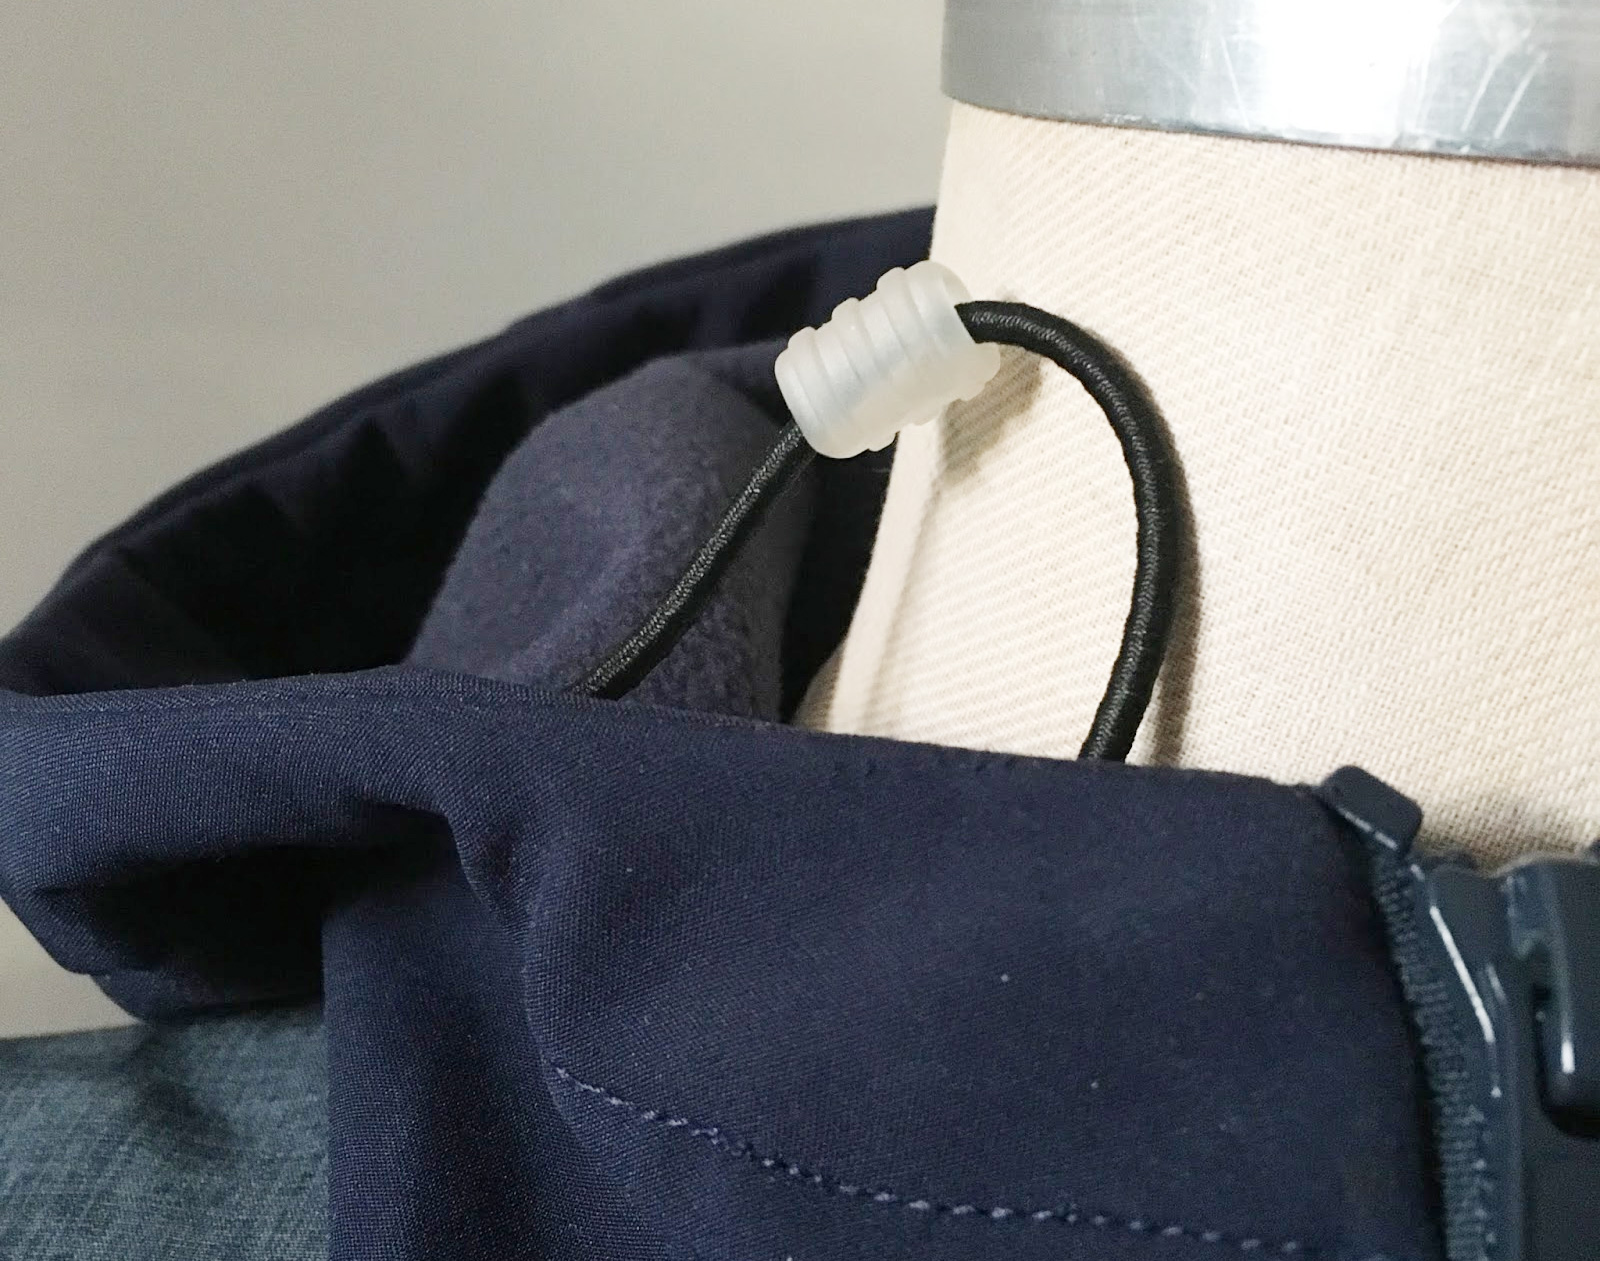 How to add adjustable elastic cord on a jacket